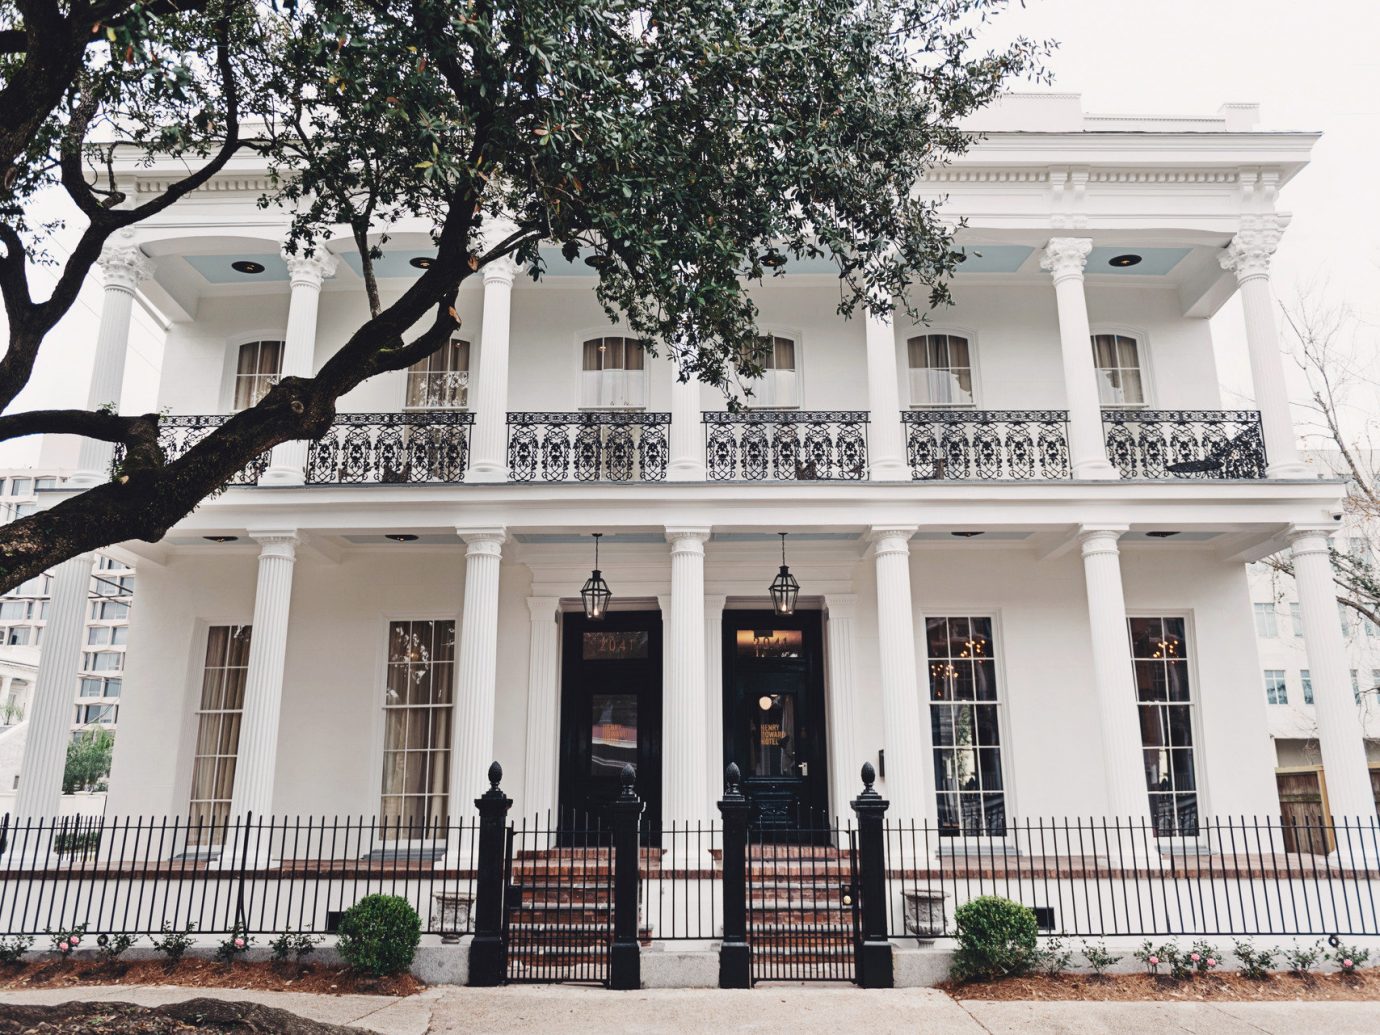 Boutique Hotels Food + Drink Girls Getaways Hotels New Orleans Trip Ideas Weekend Getaways tree property outdoor building neighbourhood house Architecture home estate facade plaza Courtyard mansion condominium palace